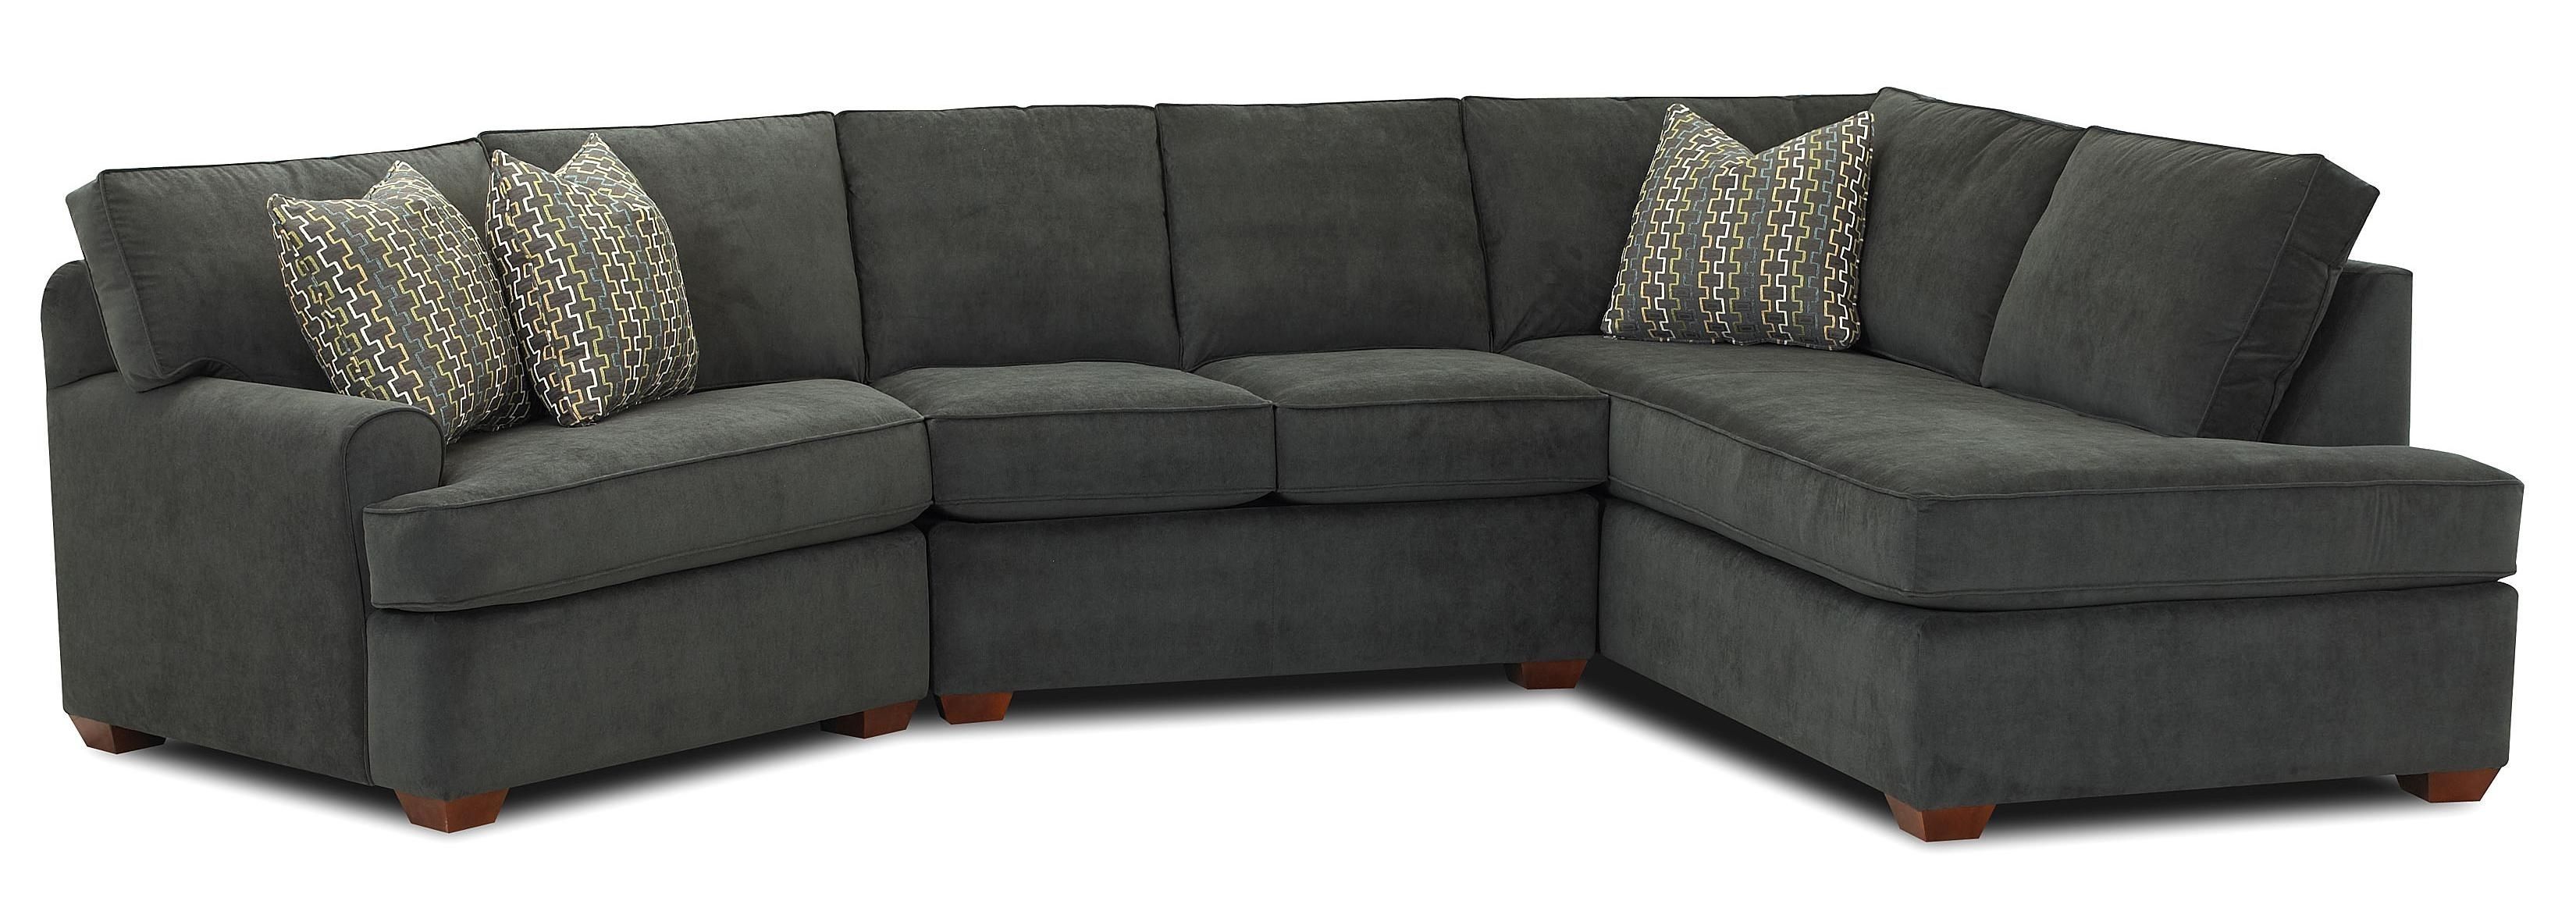 Right Angled Sectional Sofa | Http://ml2r | Pinterest Throughout Sectional Sofas At Brampton (Photo 3 of 15)